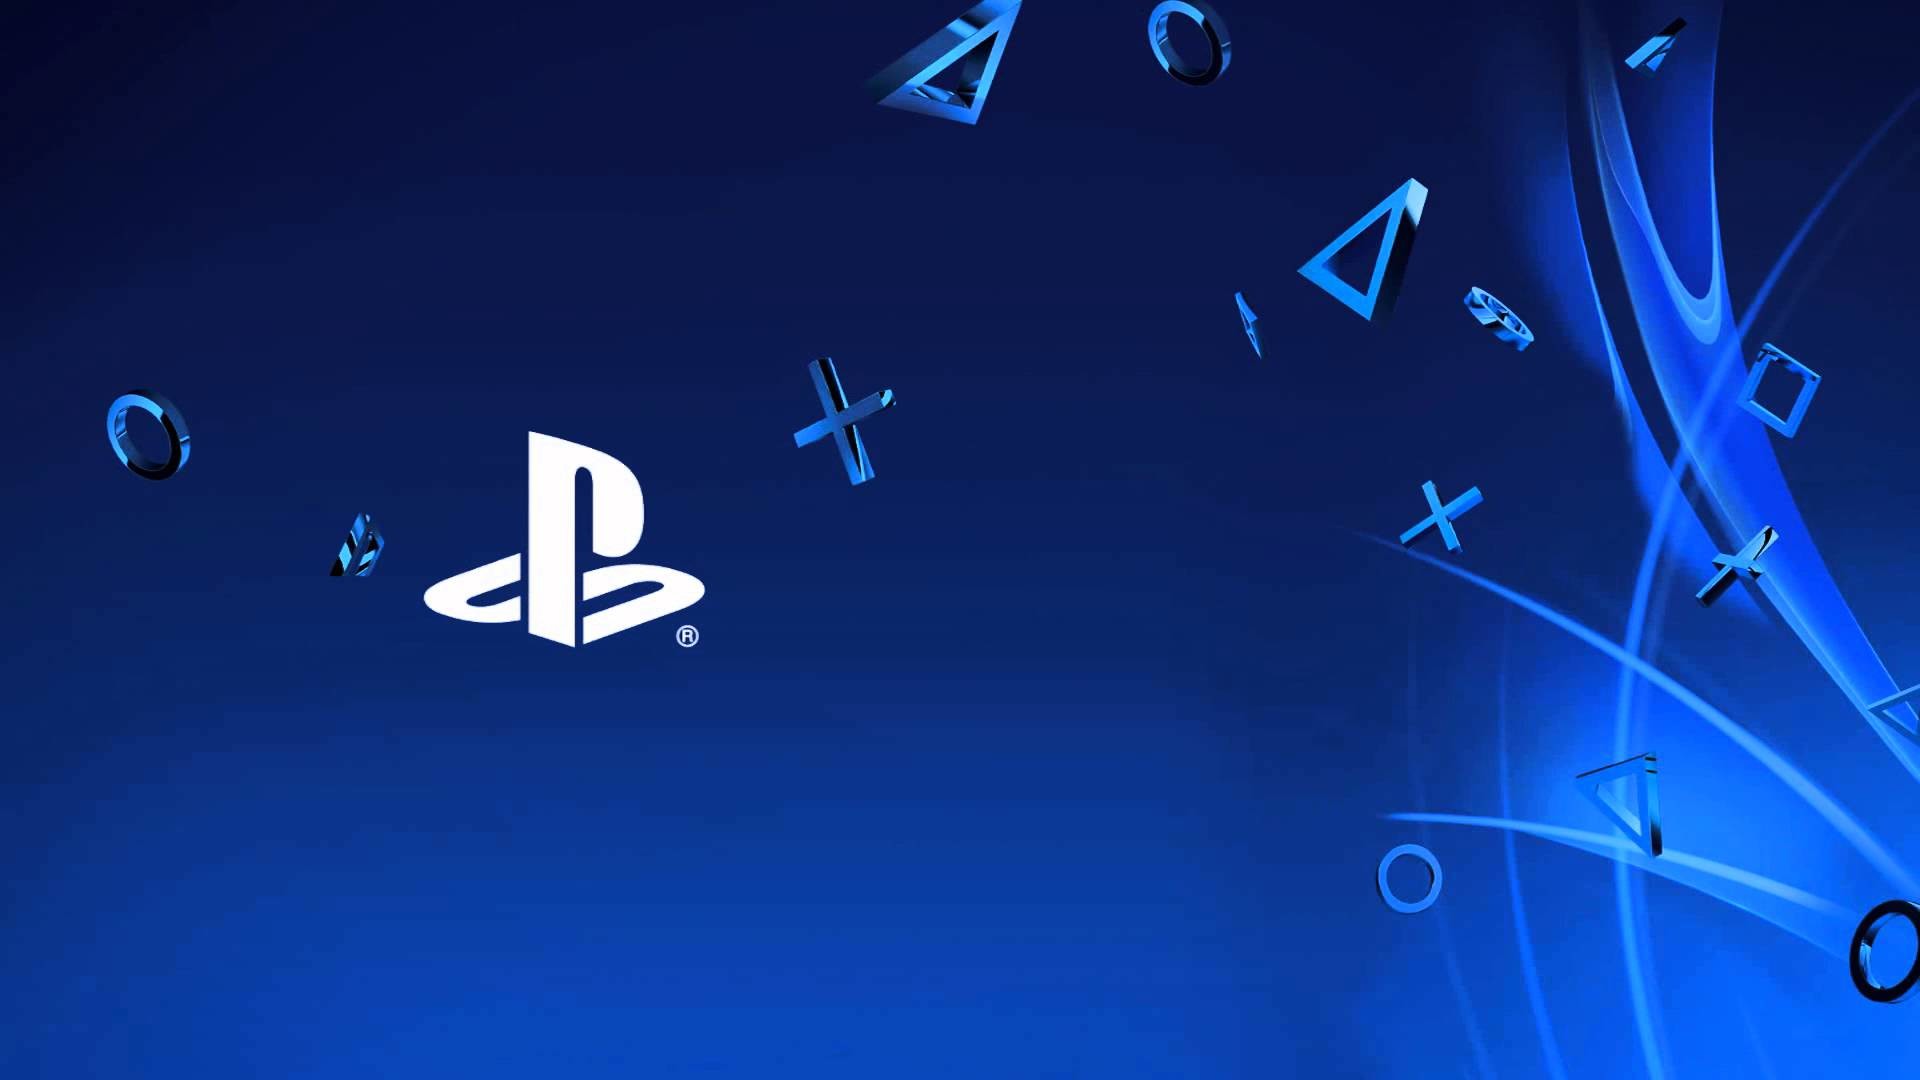 ps4 wallpapers, ps4 themes and wallpapers